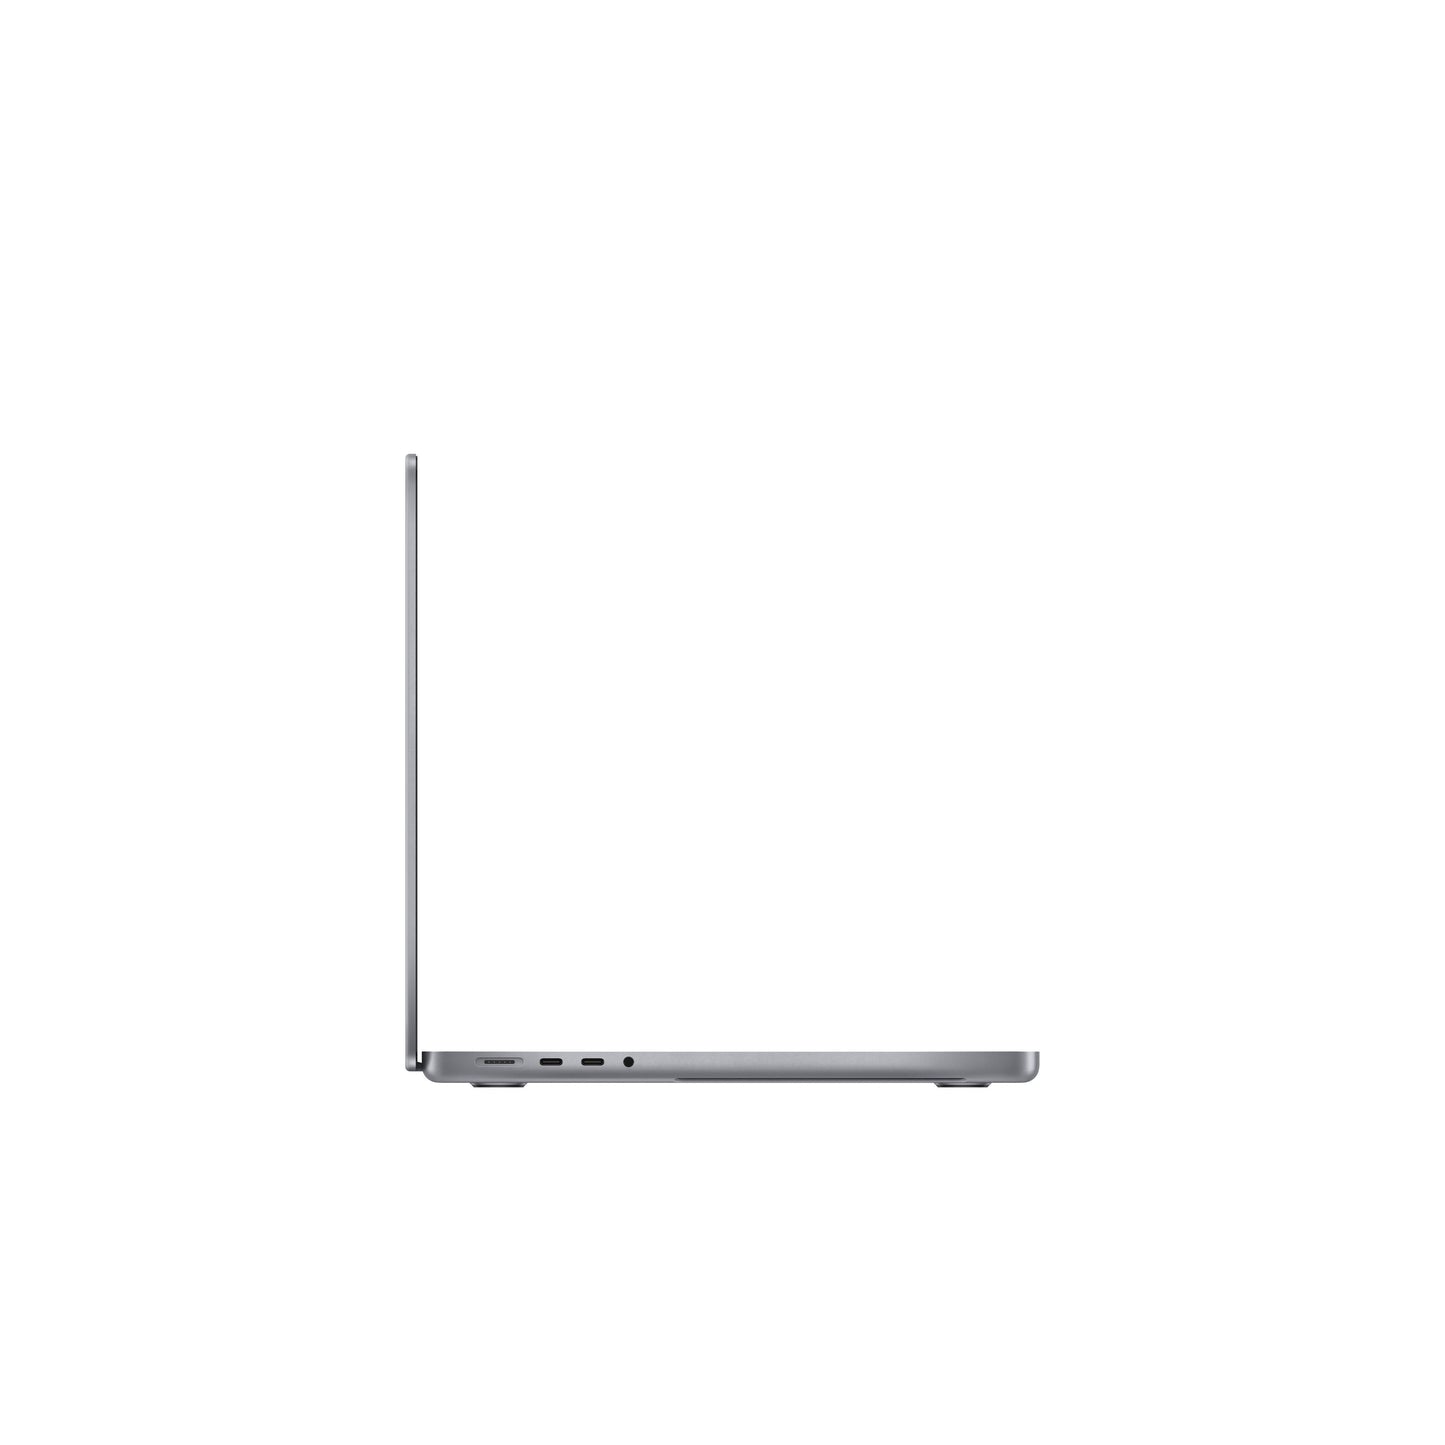 14-inch MacBook Pro: Apple M1 Pro chip with 10_core CPU and 16_core GPU, 1TB SSD - Space Grey